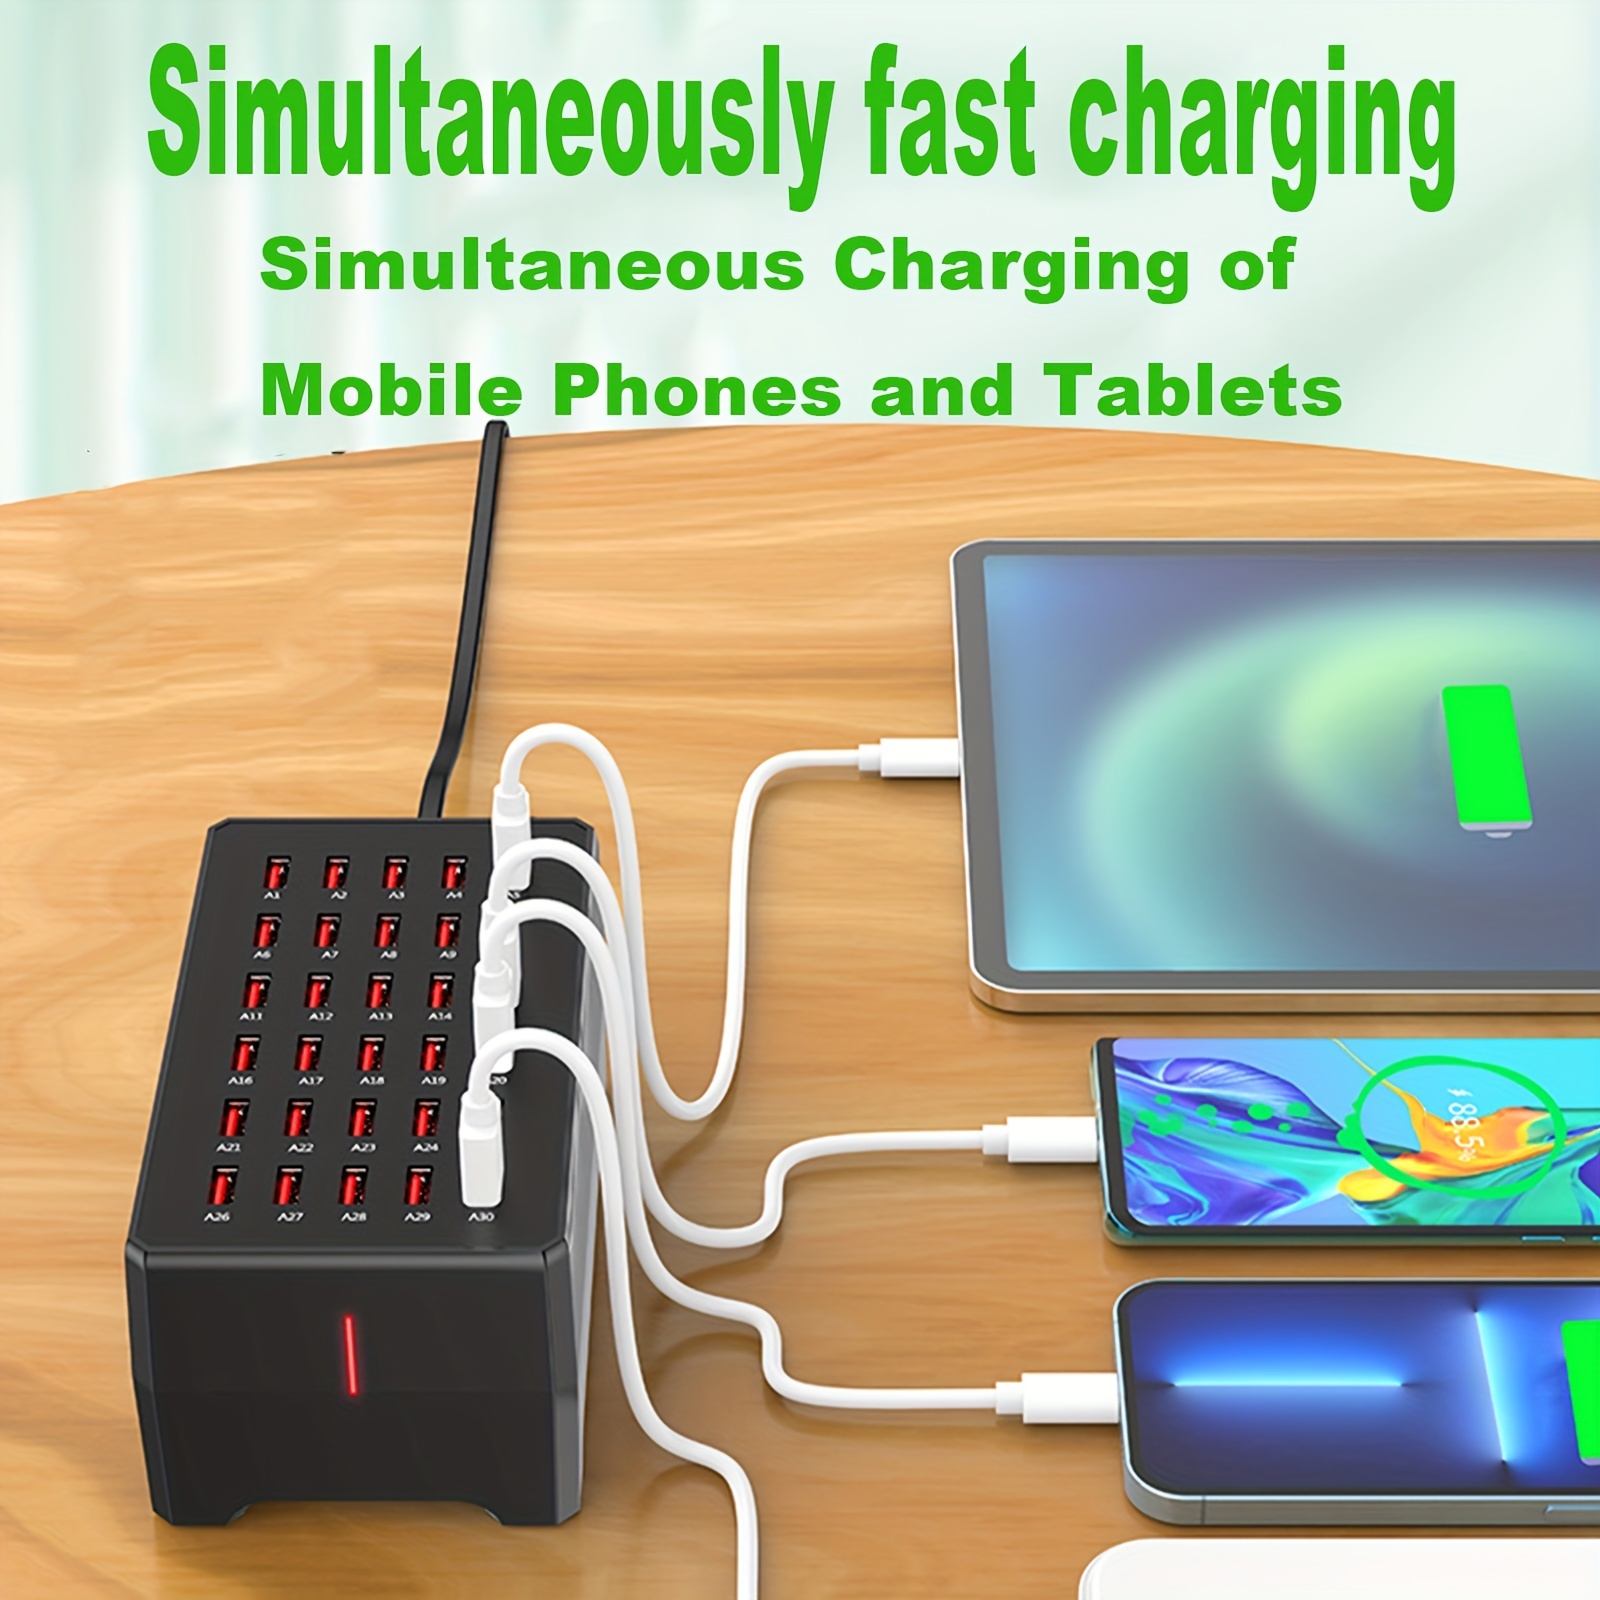 30-Port Charger, USB Charger Station, USB Fast Charger, Smart Charging  Recognition, Suitable for Travel, Family Gatherings, Schools, Shopping  malls